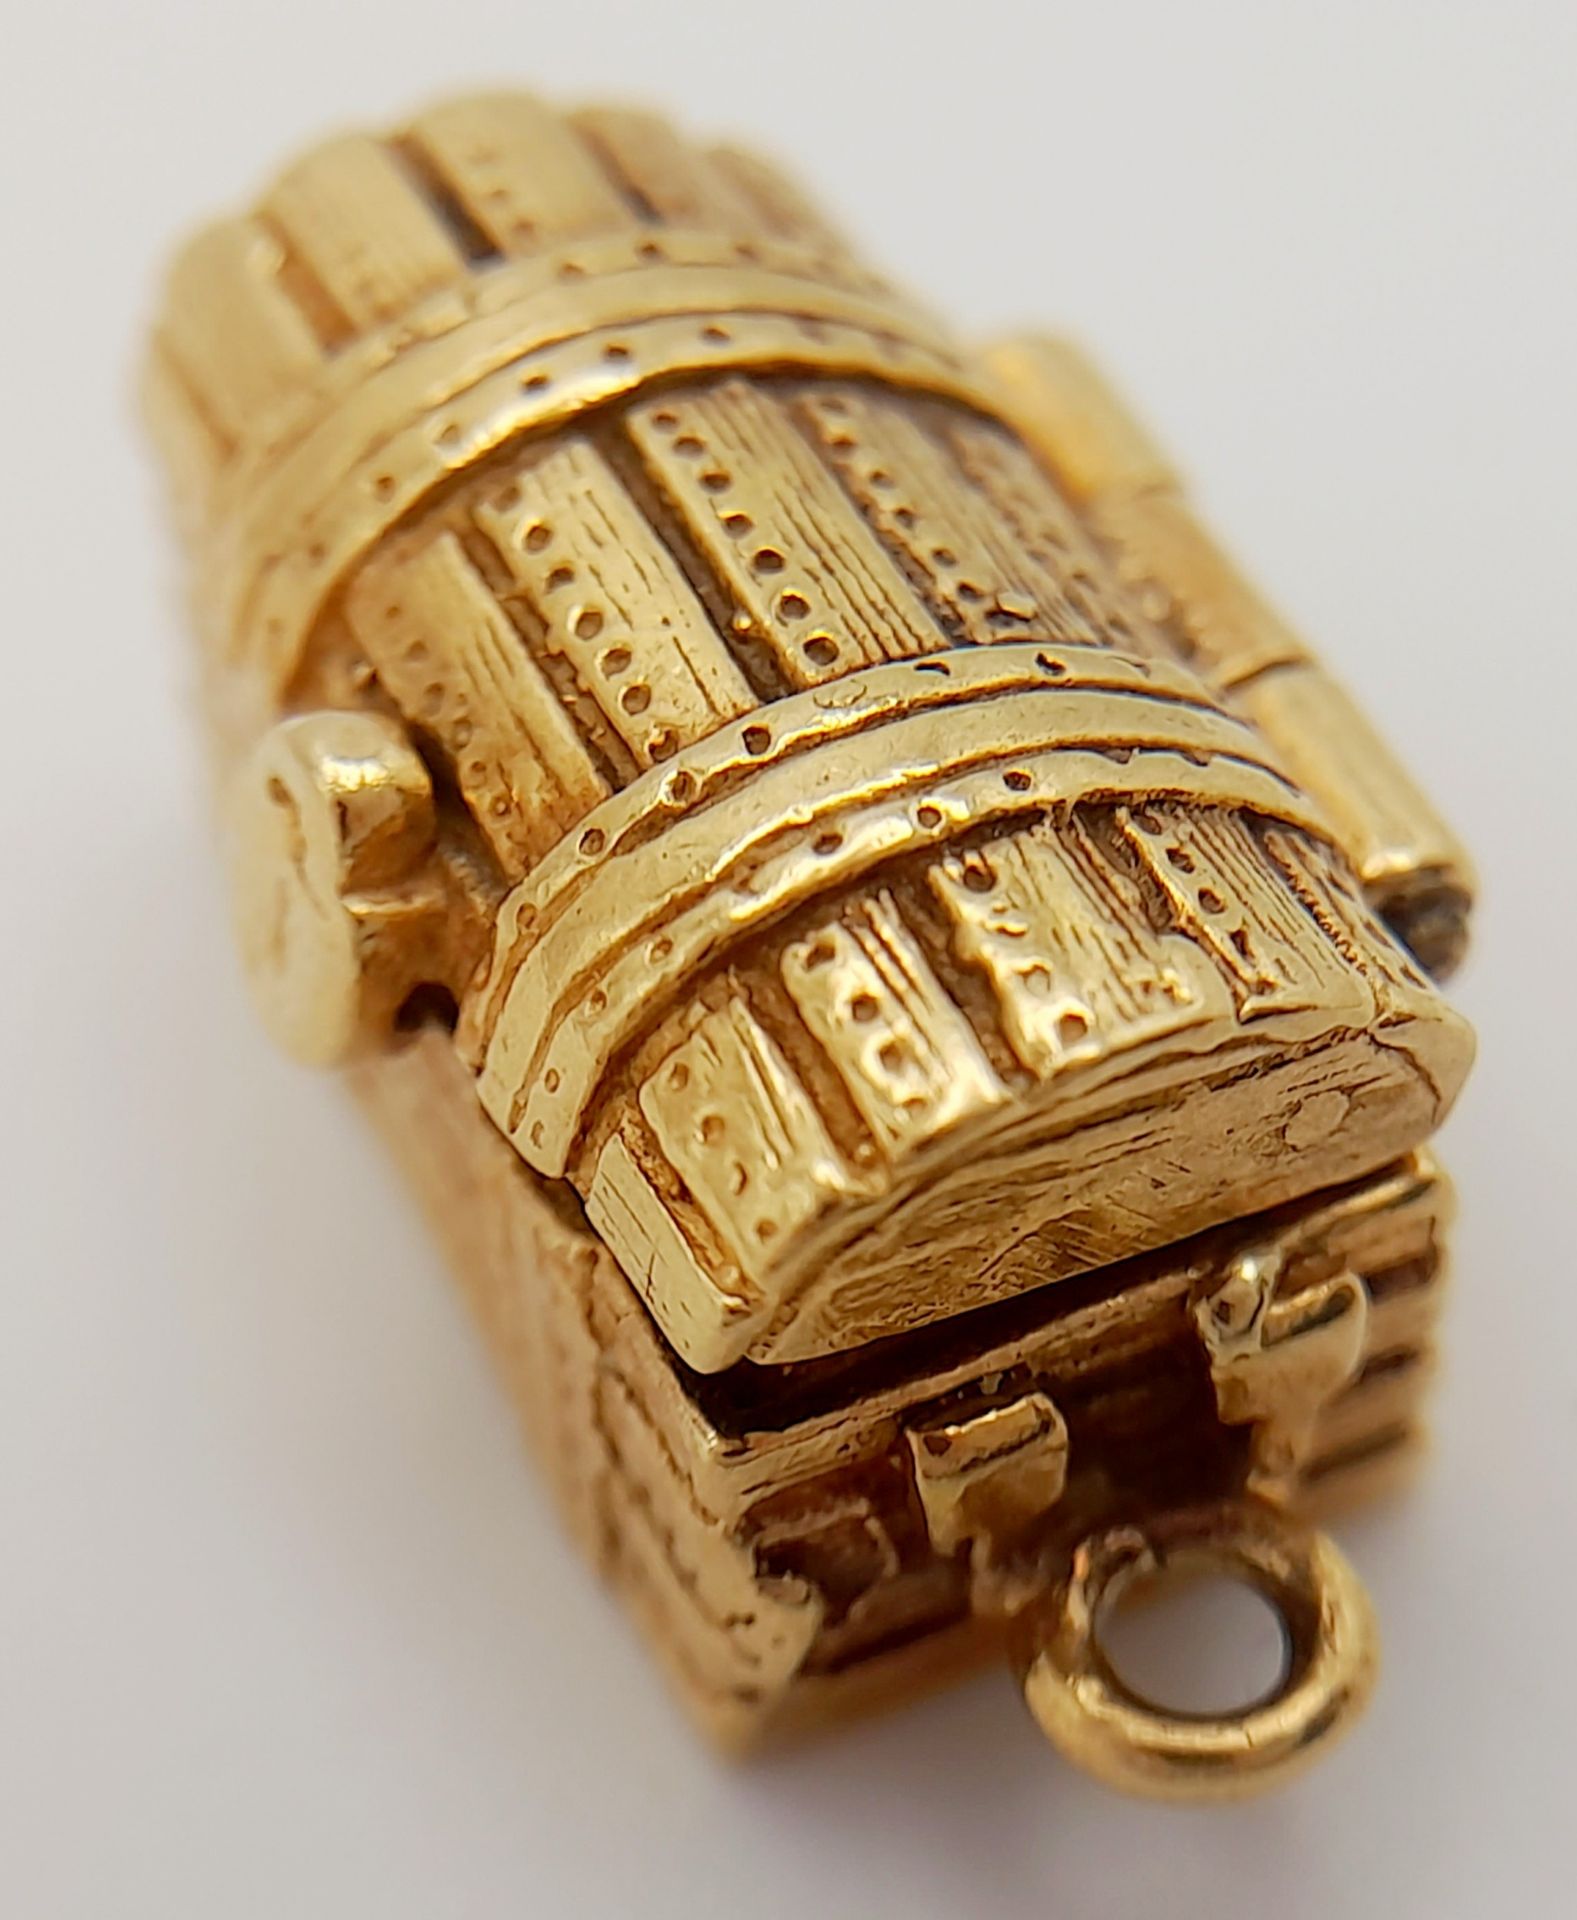 A 9K YELLOW GOLD TREASURE CHEST CHARM, WHICH OPENS TO REVEAL THE TREASURE INSIDE. 2cm length, 6.5g - Image 4 of 5